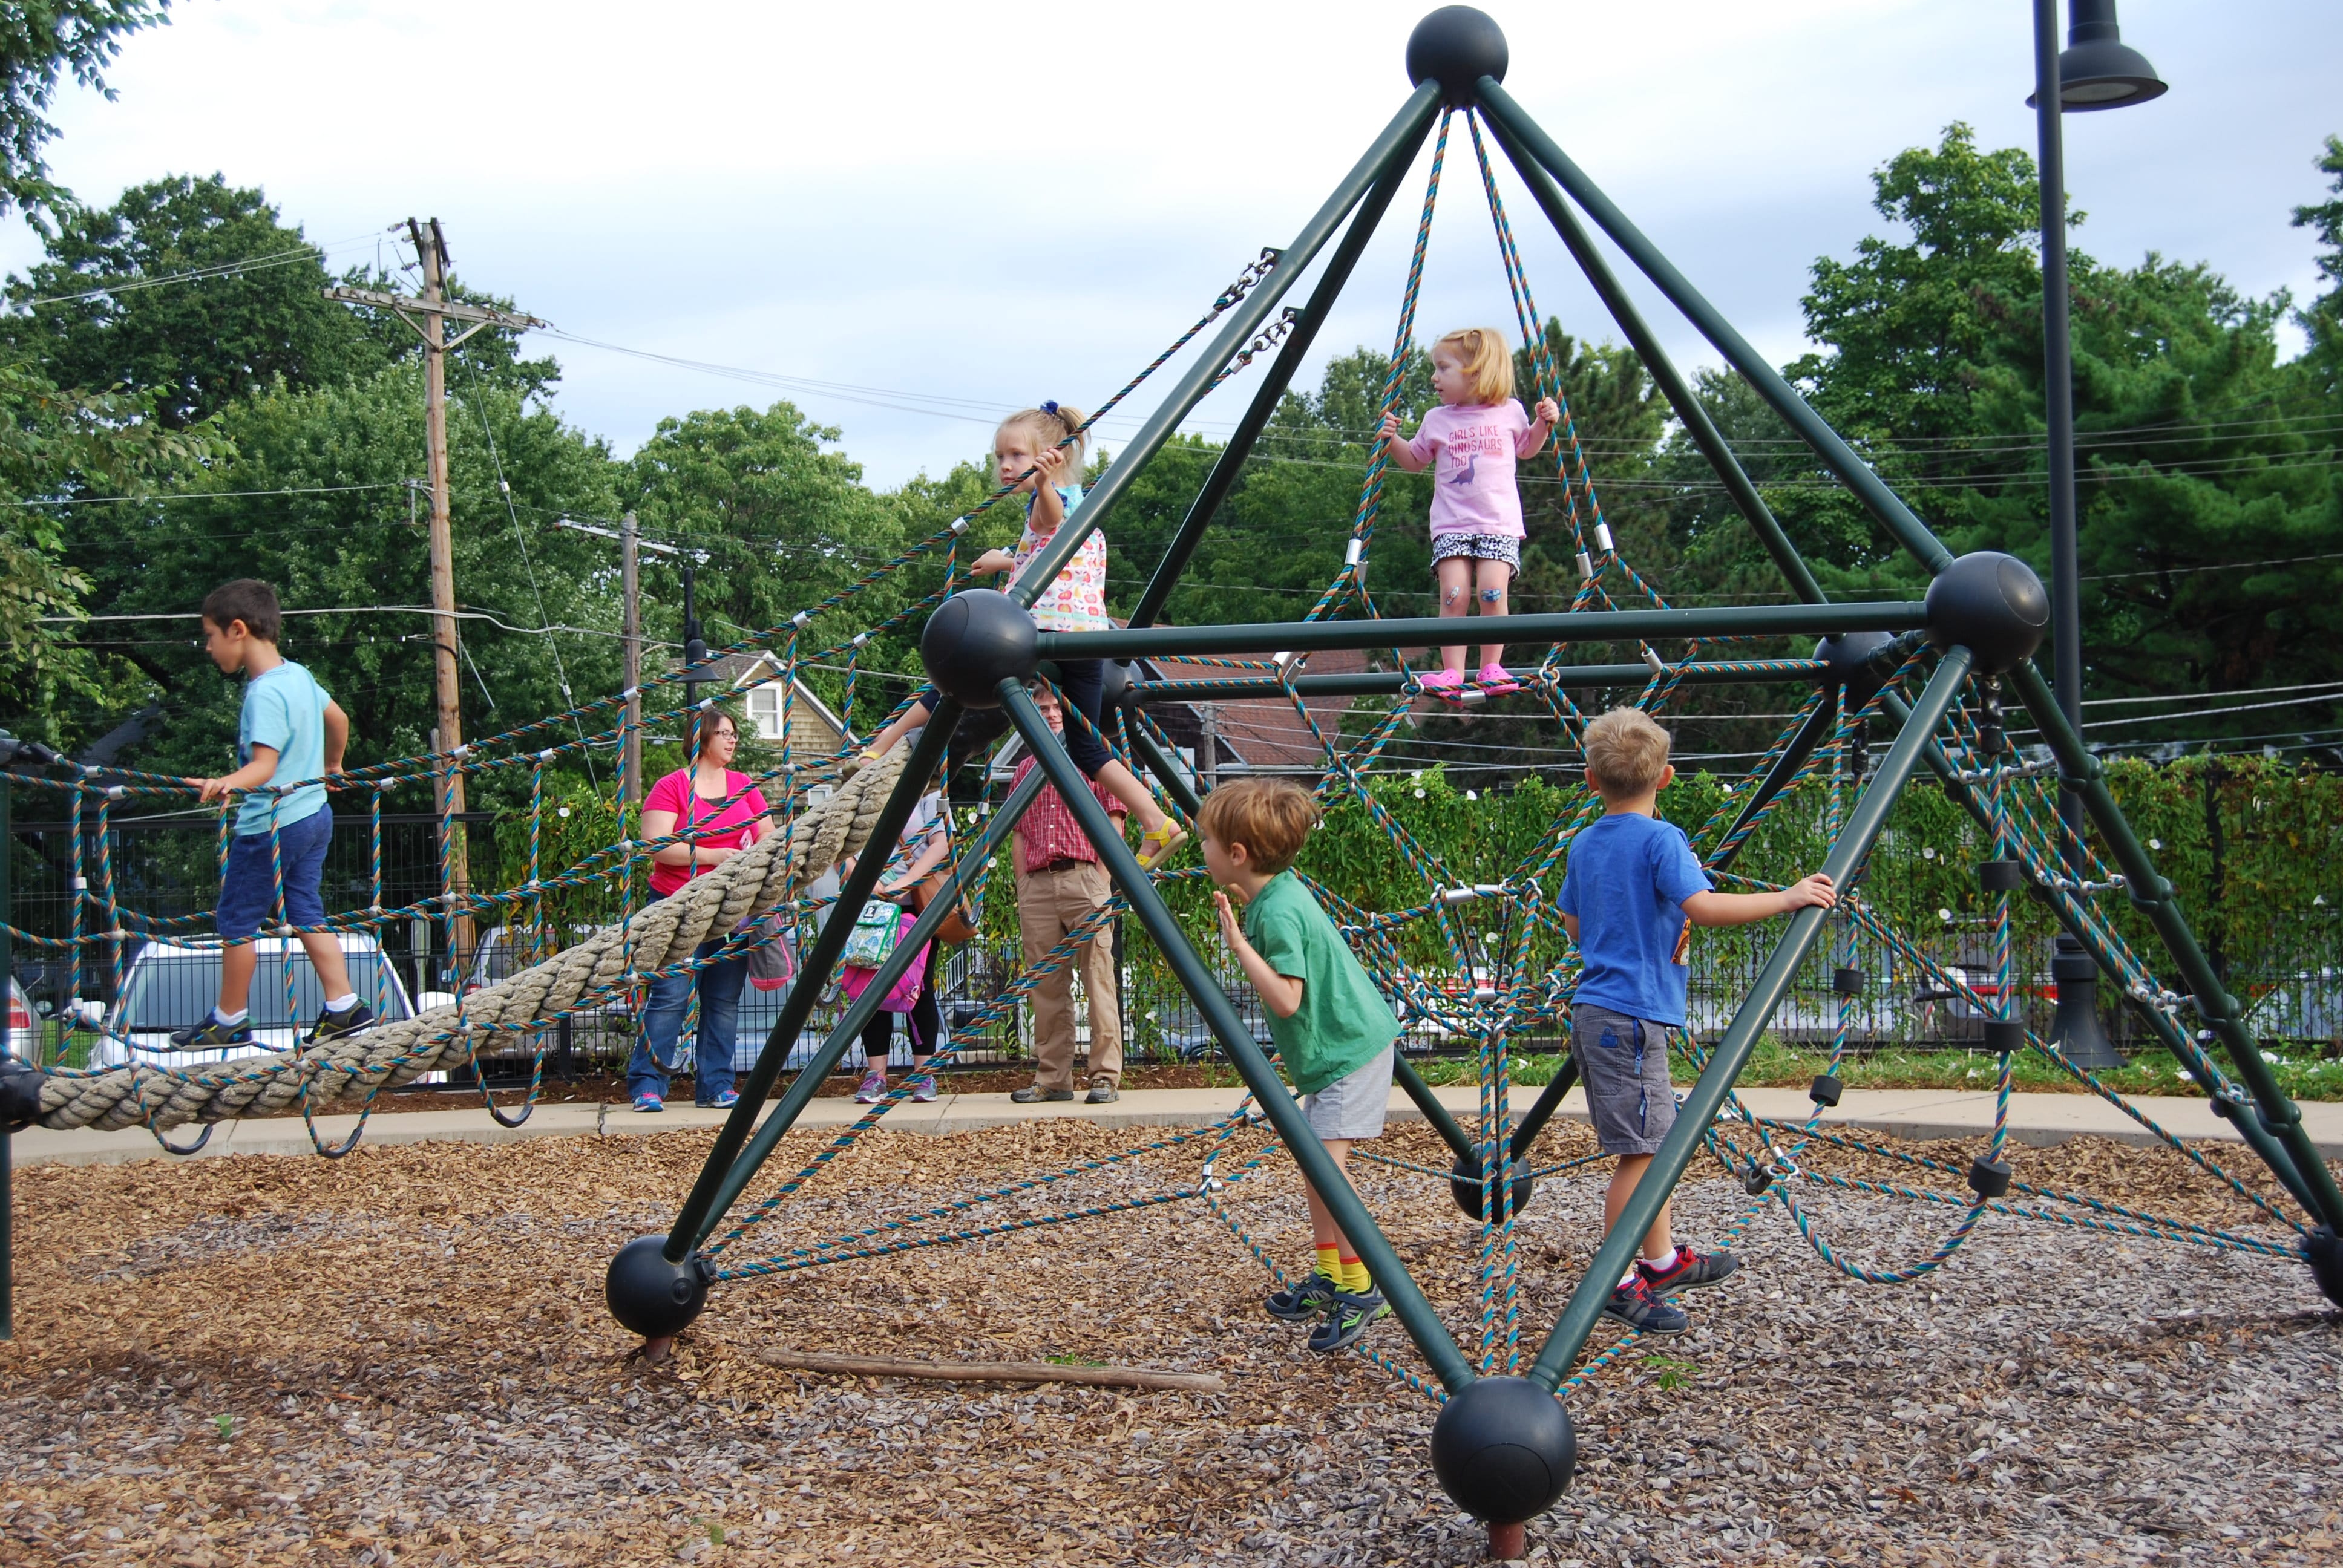 Early Childhood students on the climber.